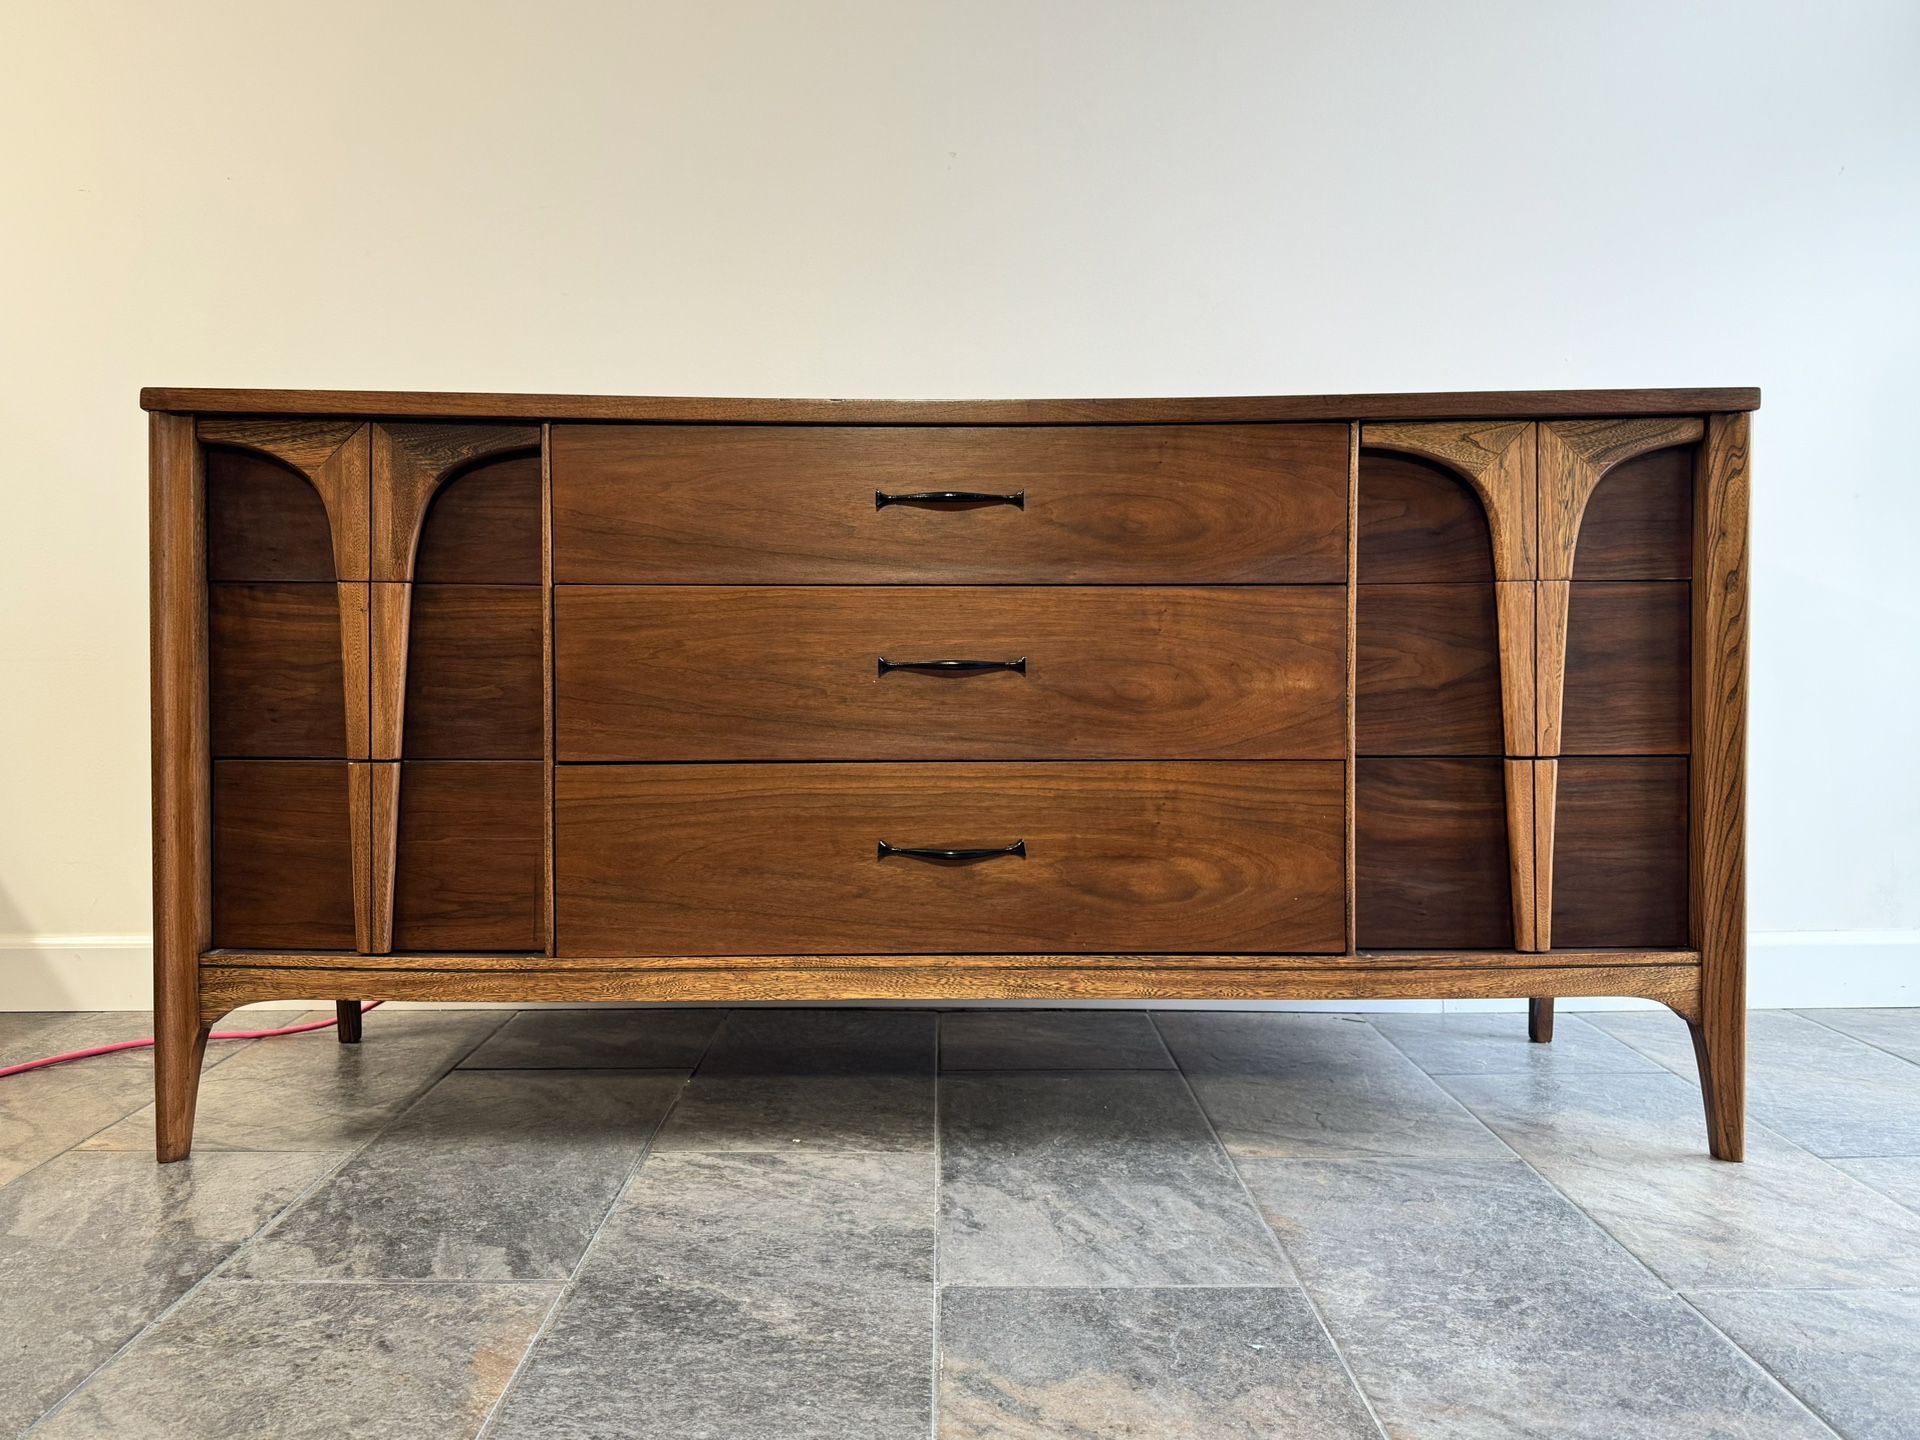 Beautiful Sculpted Mid-Century Modern Lowboy Dresser by Style House